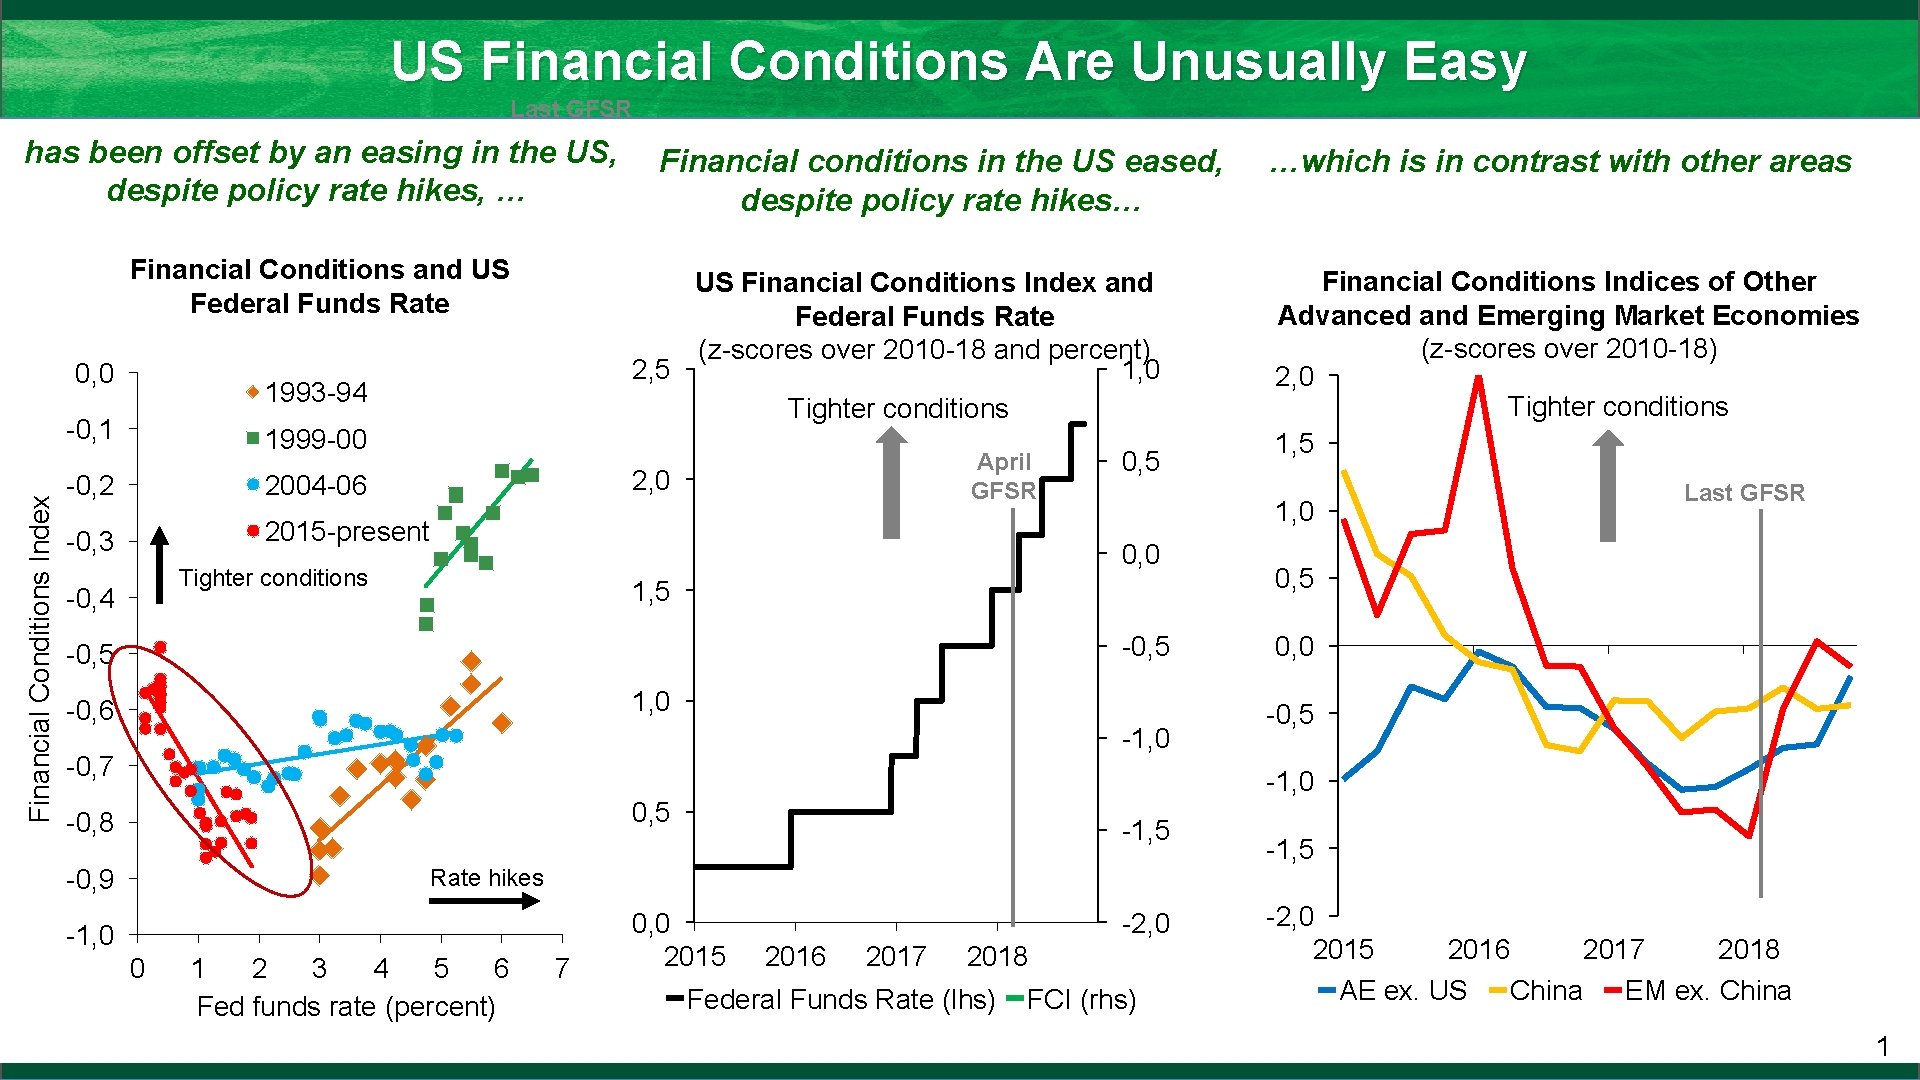 US Financial Conditions Are Unusually Easy Last GFSR has been offset by an easing